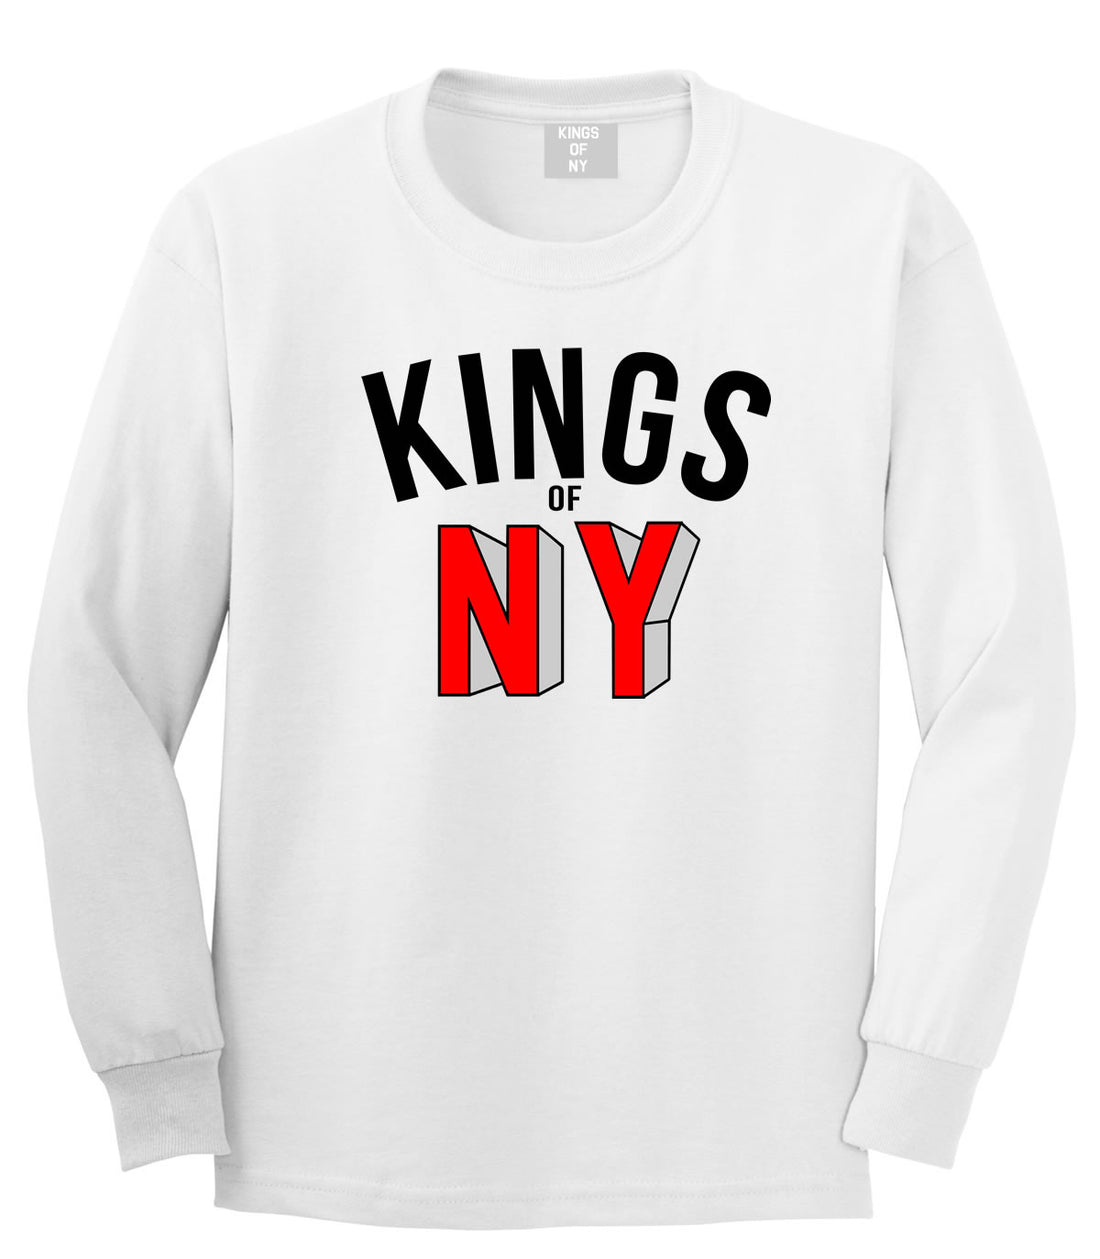 NY Red Block Letter Printed Long Sleeve T-Shirt in White by Kings Of NY